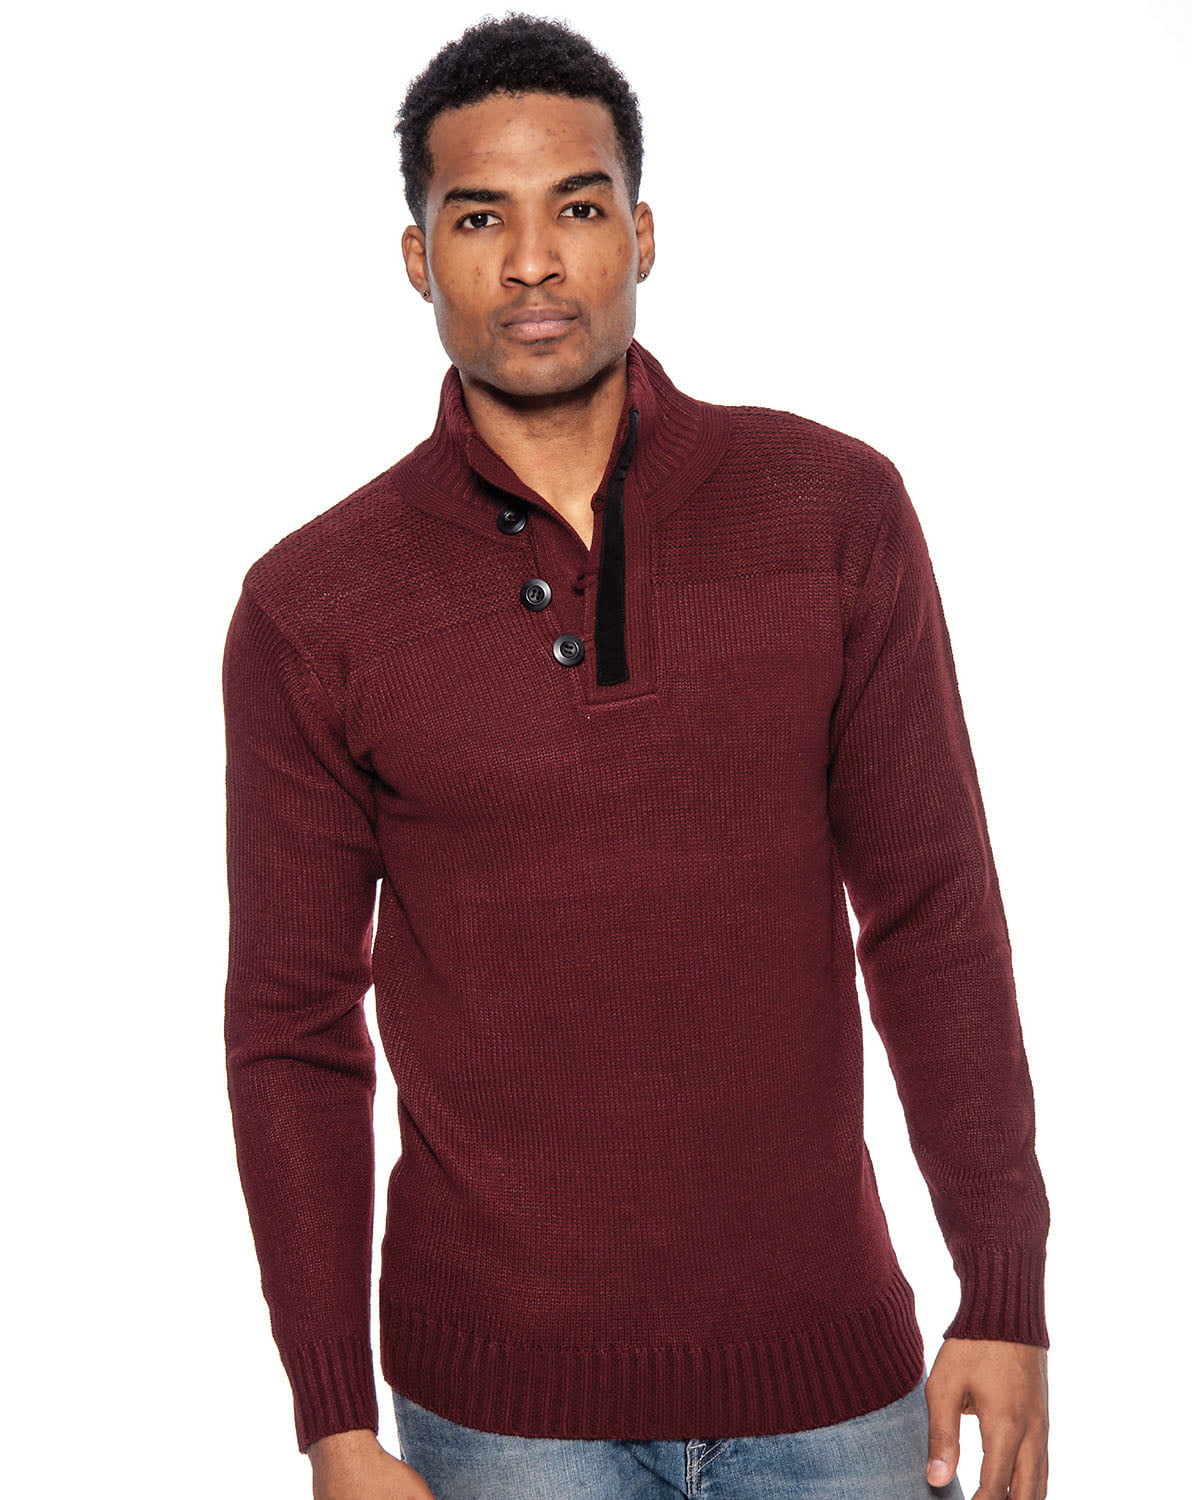 TR Men's Lightweight Loose Weave Sweater by 9 Crowns Essentials ...